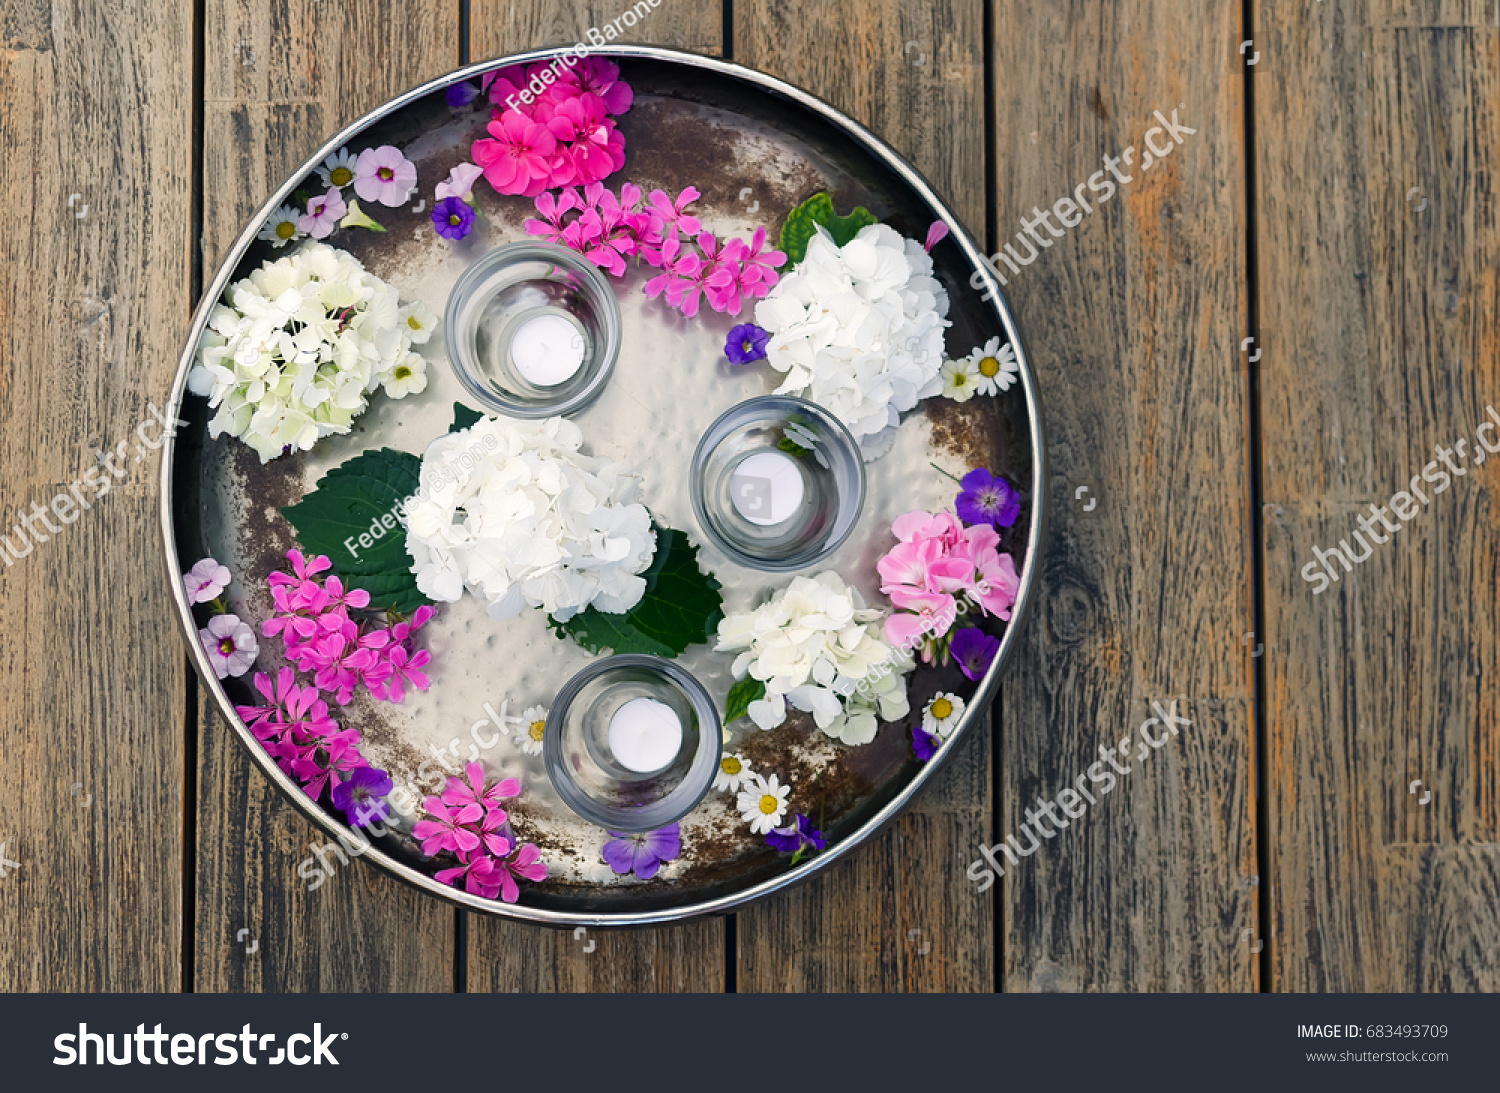 stock-photo-spa-set-on-rustic-wooden-tab